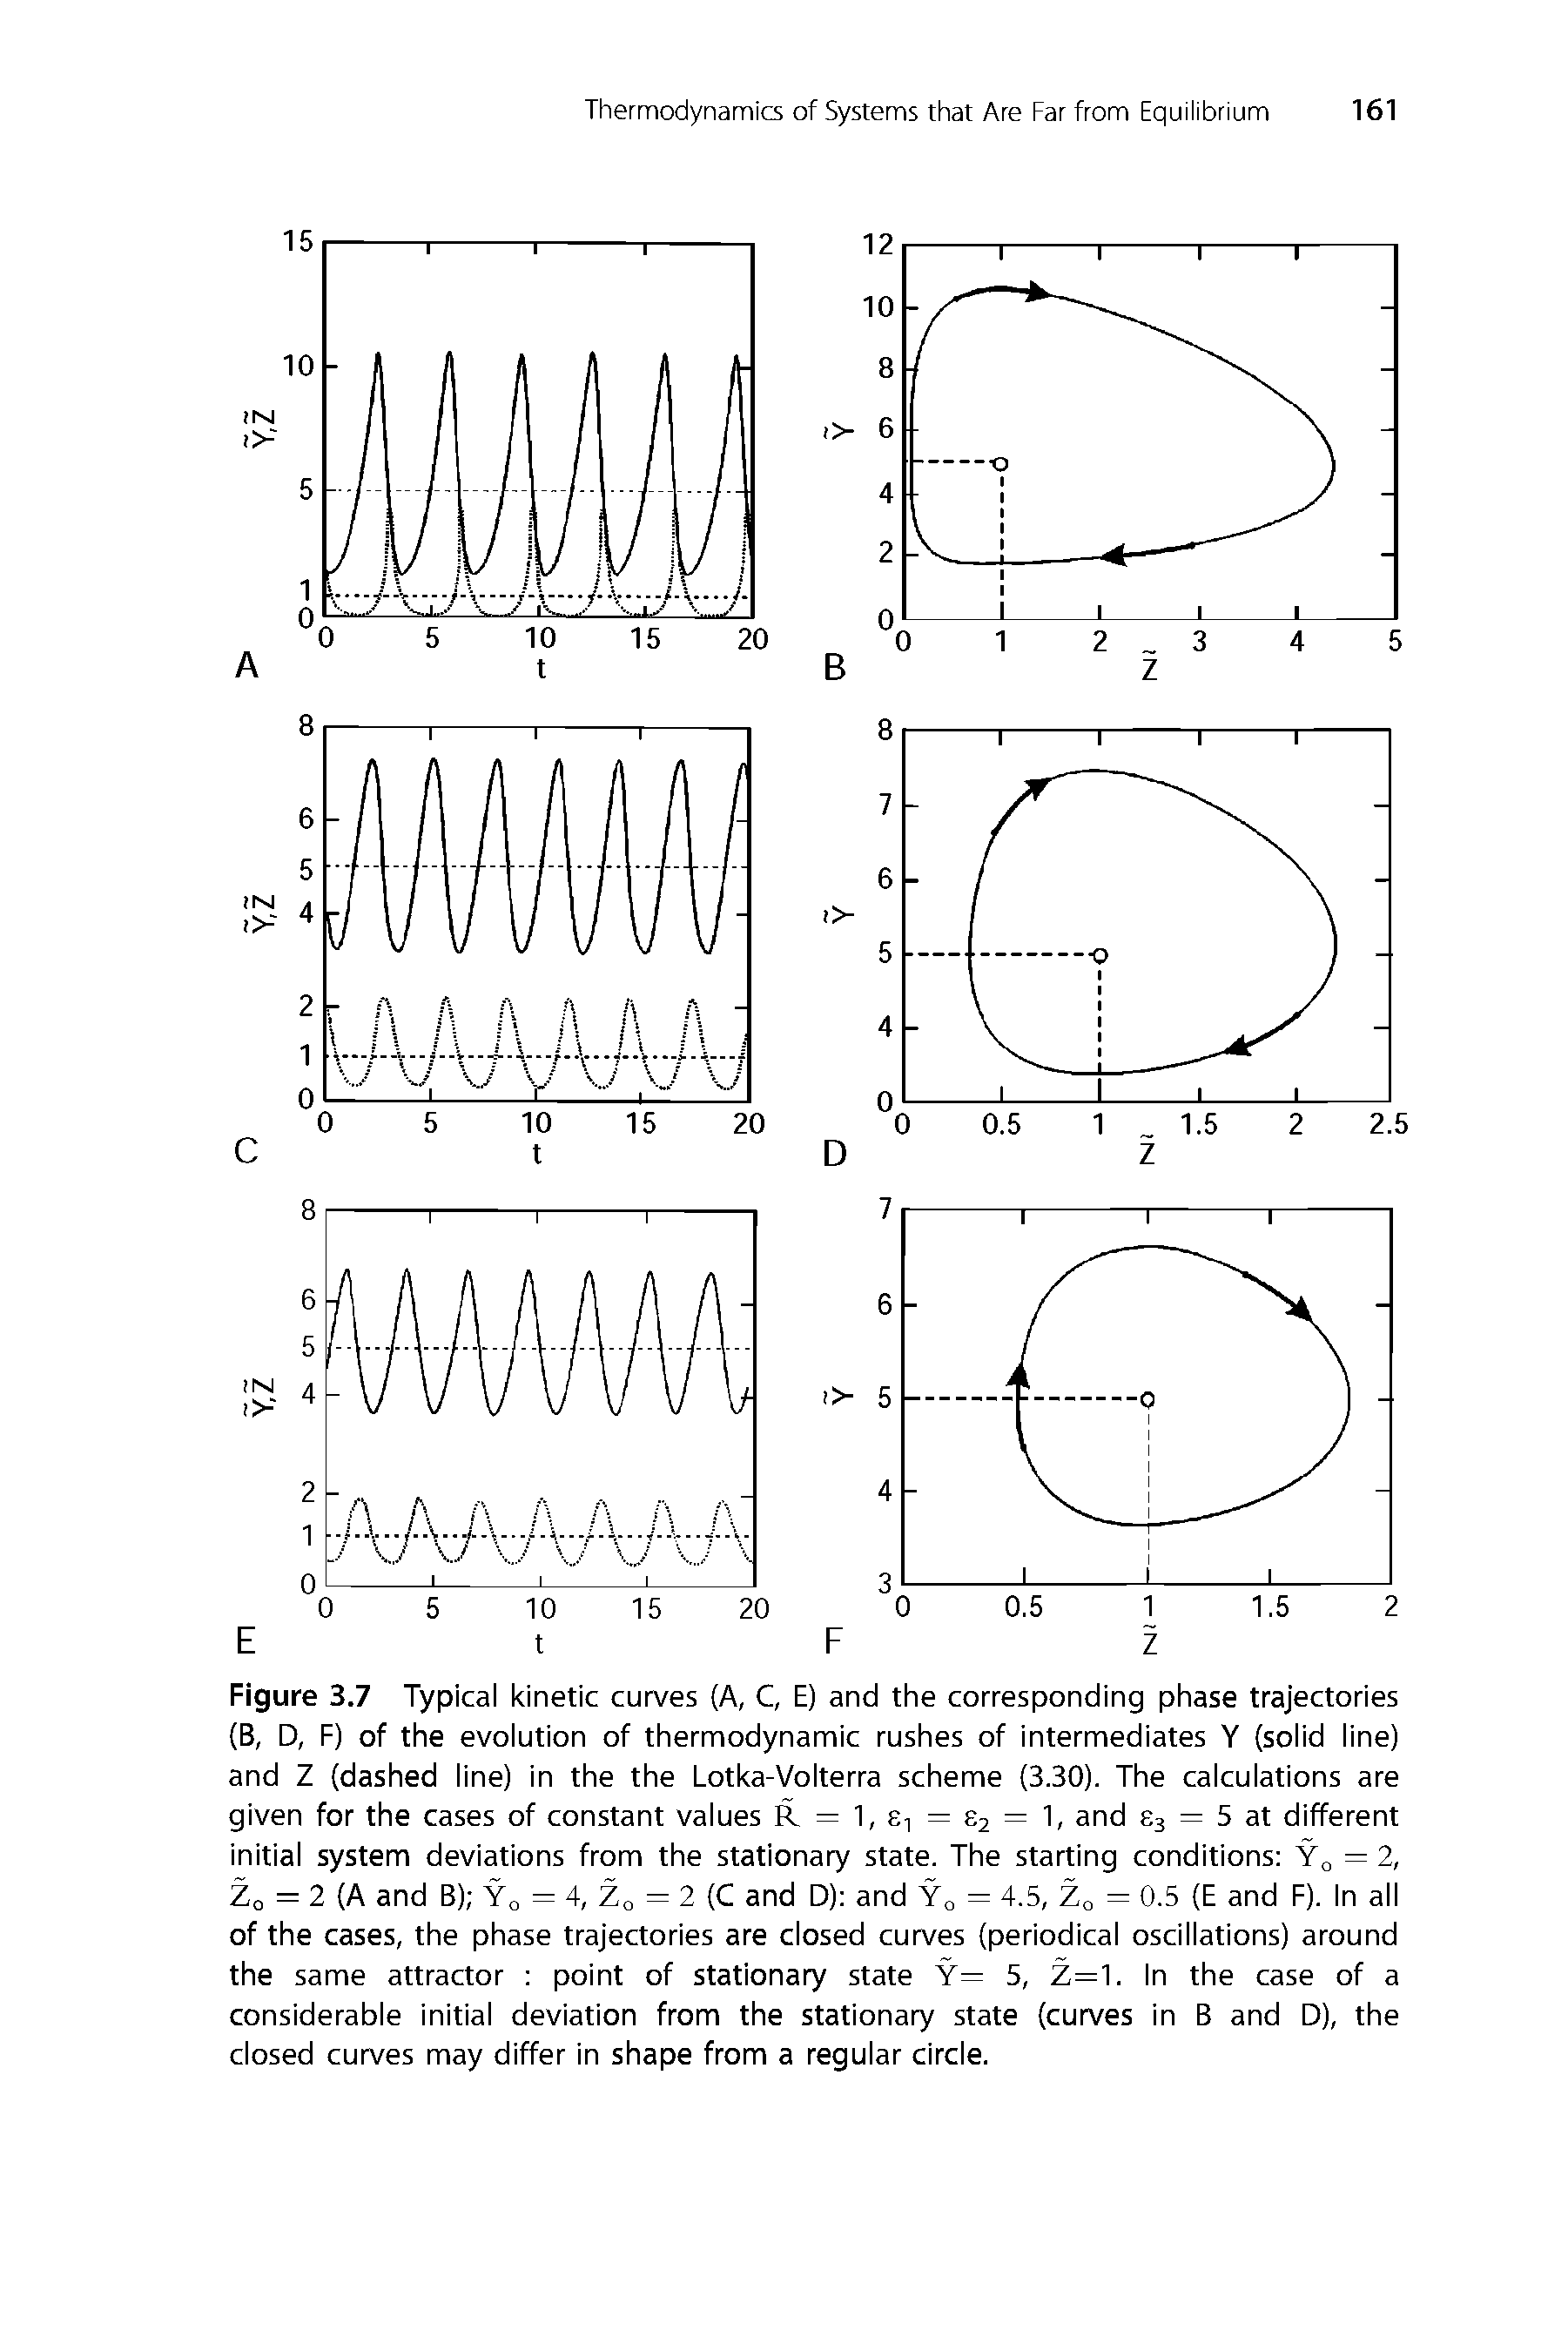 Figure 3.7 Typical kinetic curves (A, C, E) and the corresponding phase trajectories (B, D, F) of the evolution of thermodynamic rushes of intermediates Y (solid line) and Z (dashed line) in the the Lotka-Volterra scheme (3.30). The calculations are given for the cases of constant values R = 1, = 82 = 1, and 83 = 5 at different...